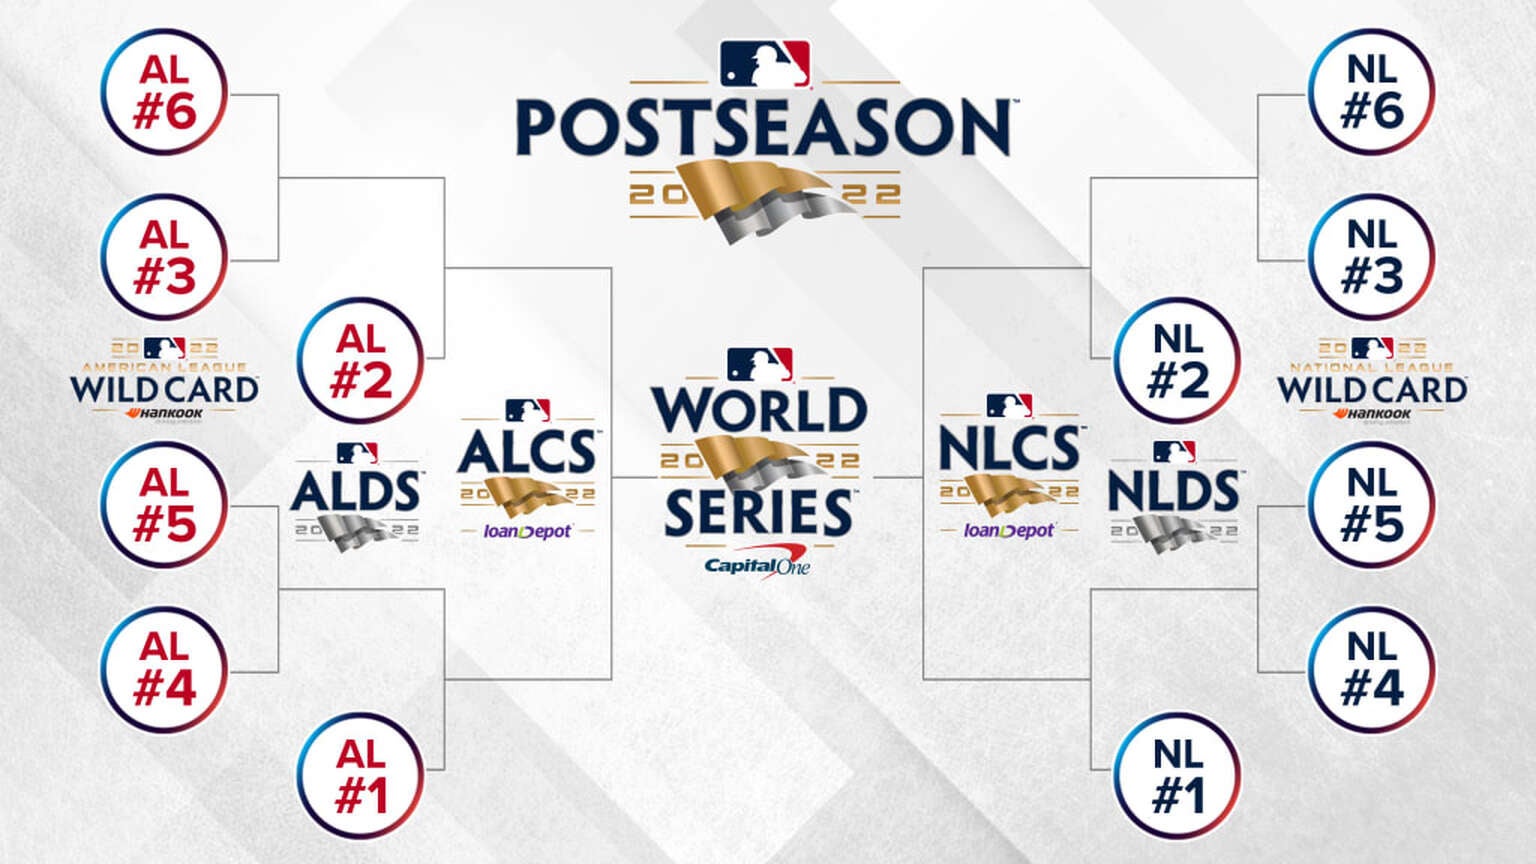 How to Stream the 2022 MLB Postseason Live Online Without Cable The